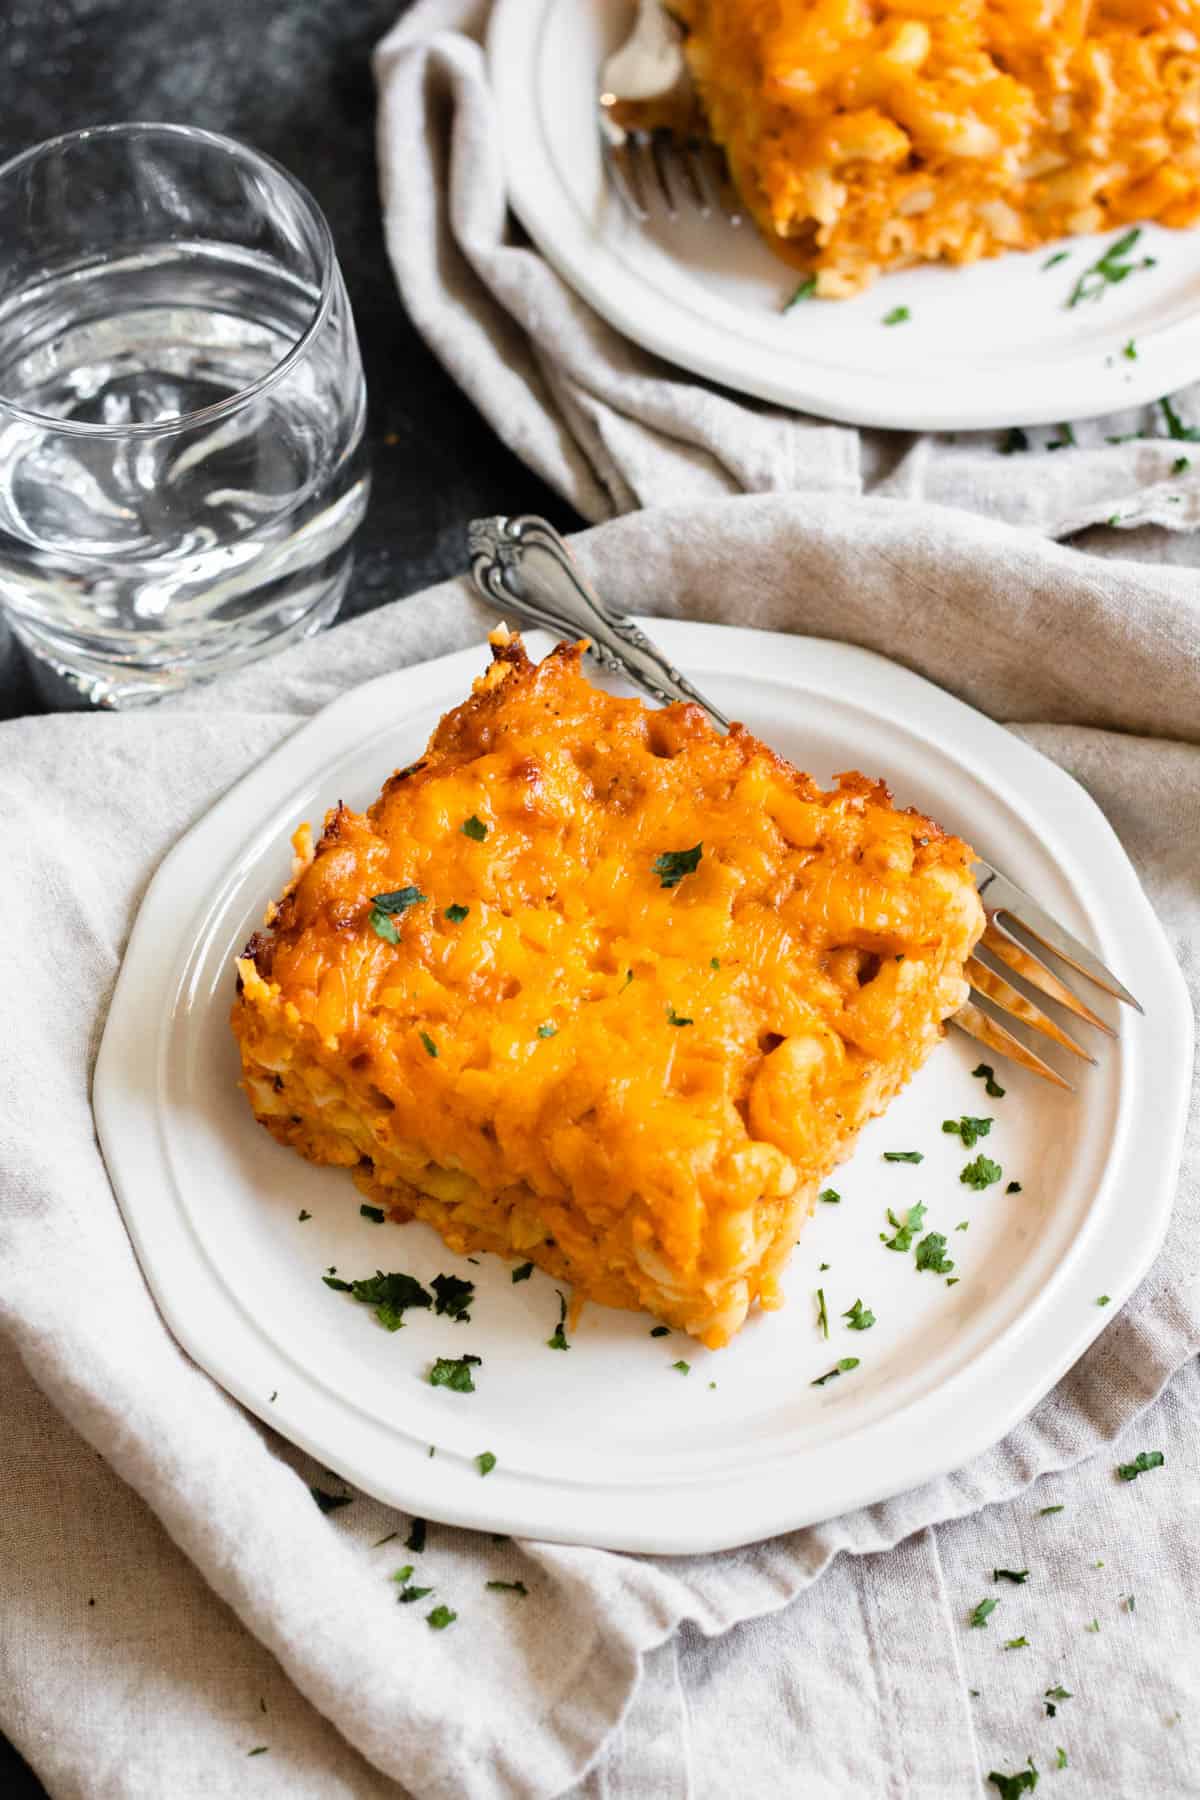 Slice of macaroni pie on a plate garnished with diced parsley.